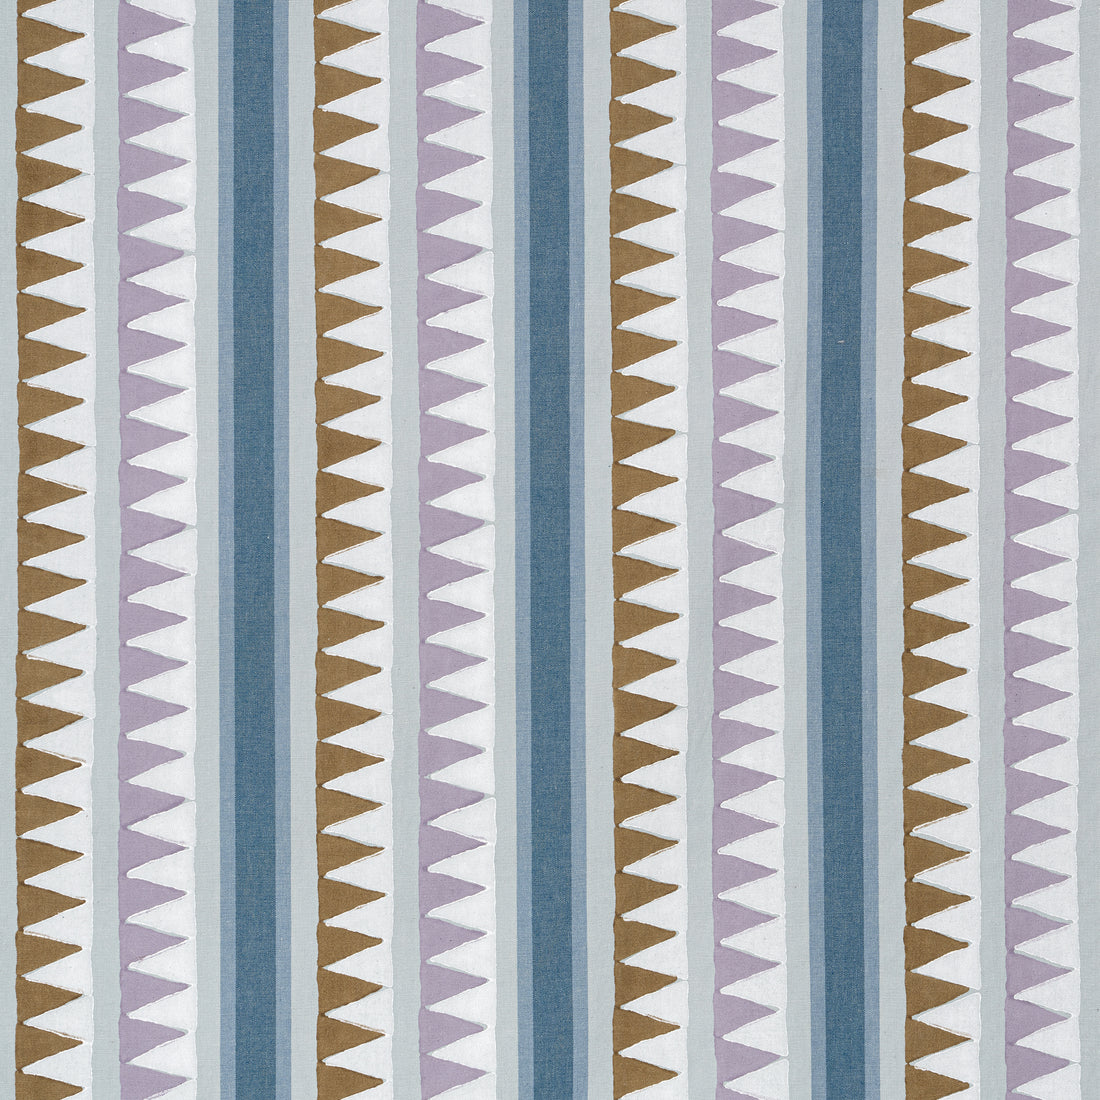 Lomita Stripe fabric in lavender and blue color - pattern number F916238 - by Thibaut in the Kismet collection